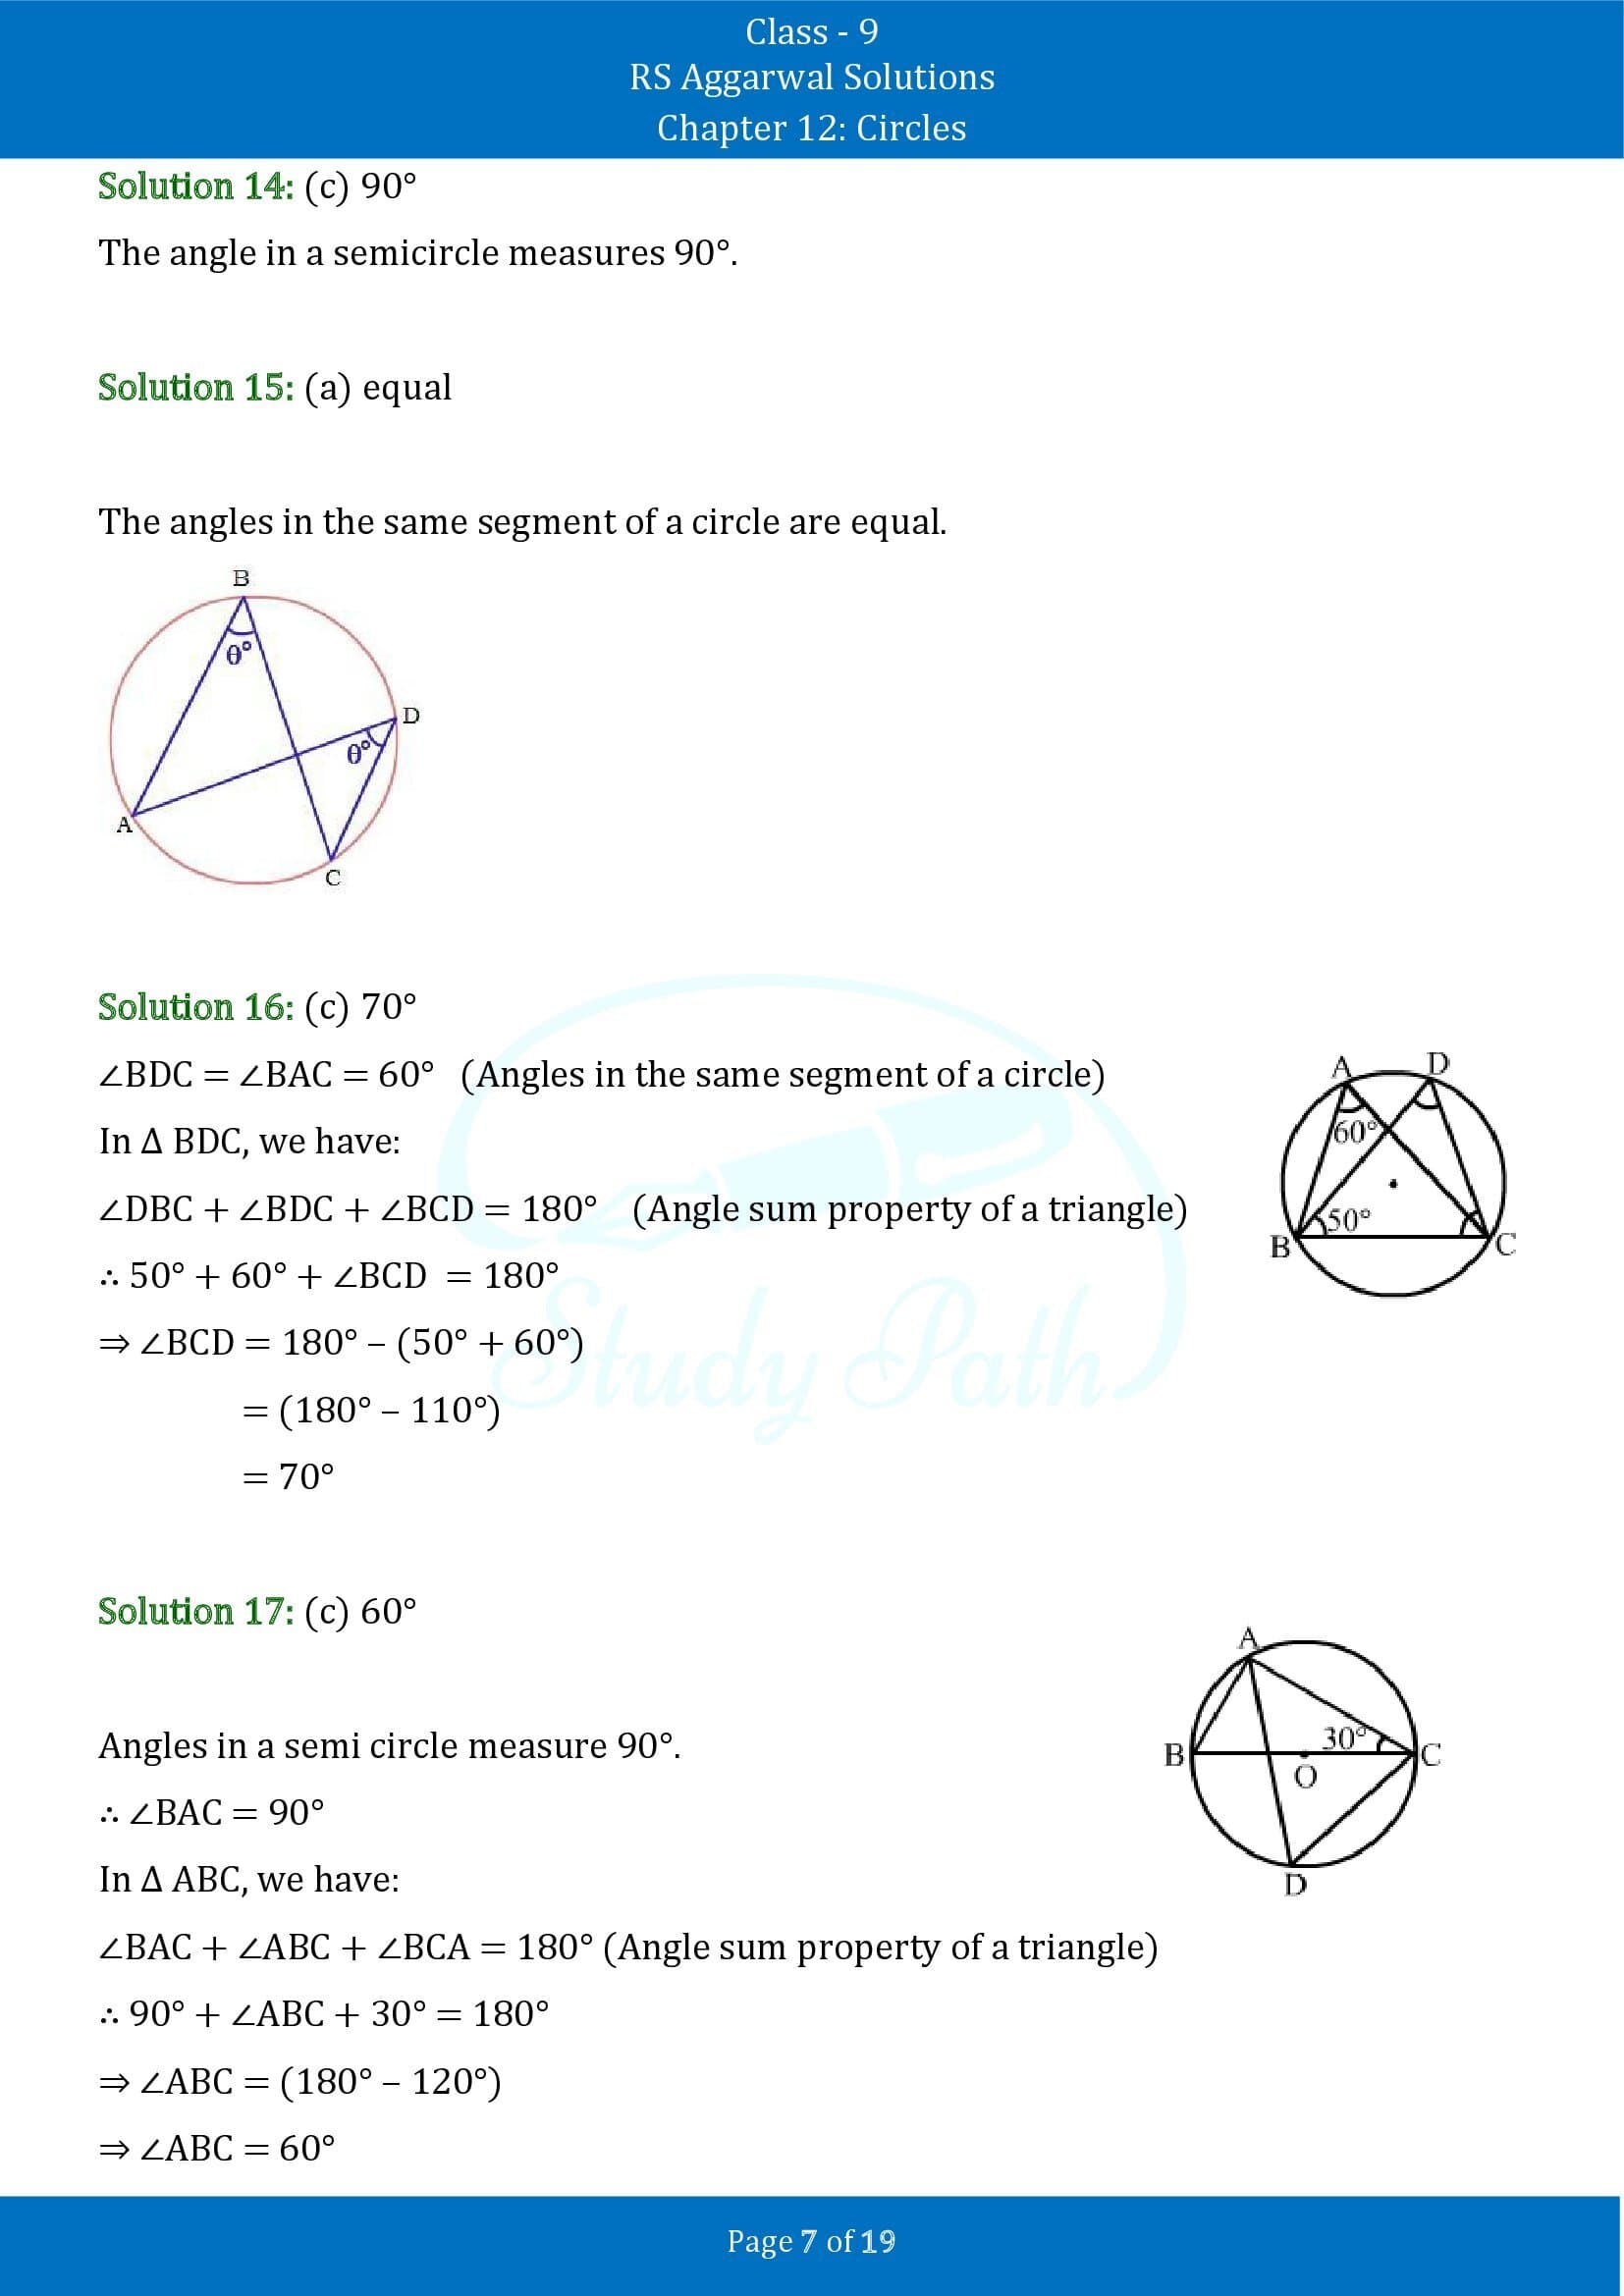 RS Aggarwal Solutions Class 9 Chapter 12 Circles Multiple Choice Questions MCQs 00007